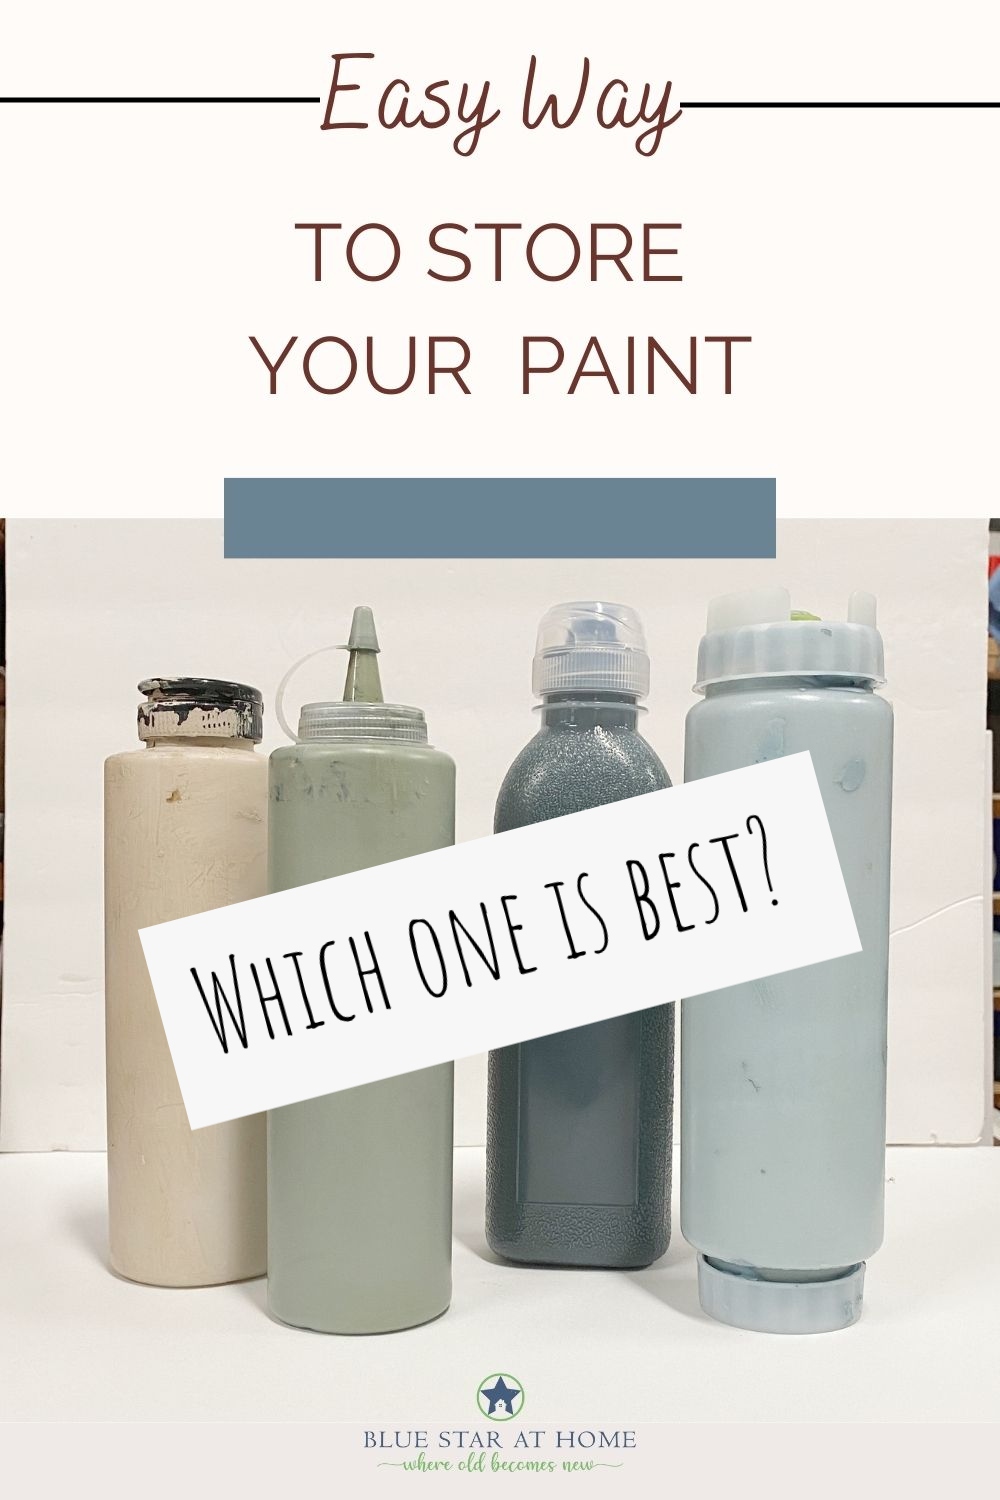 Easy way to store your paint